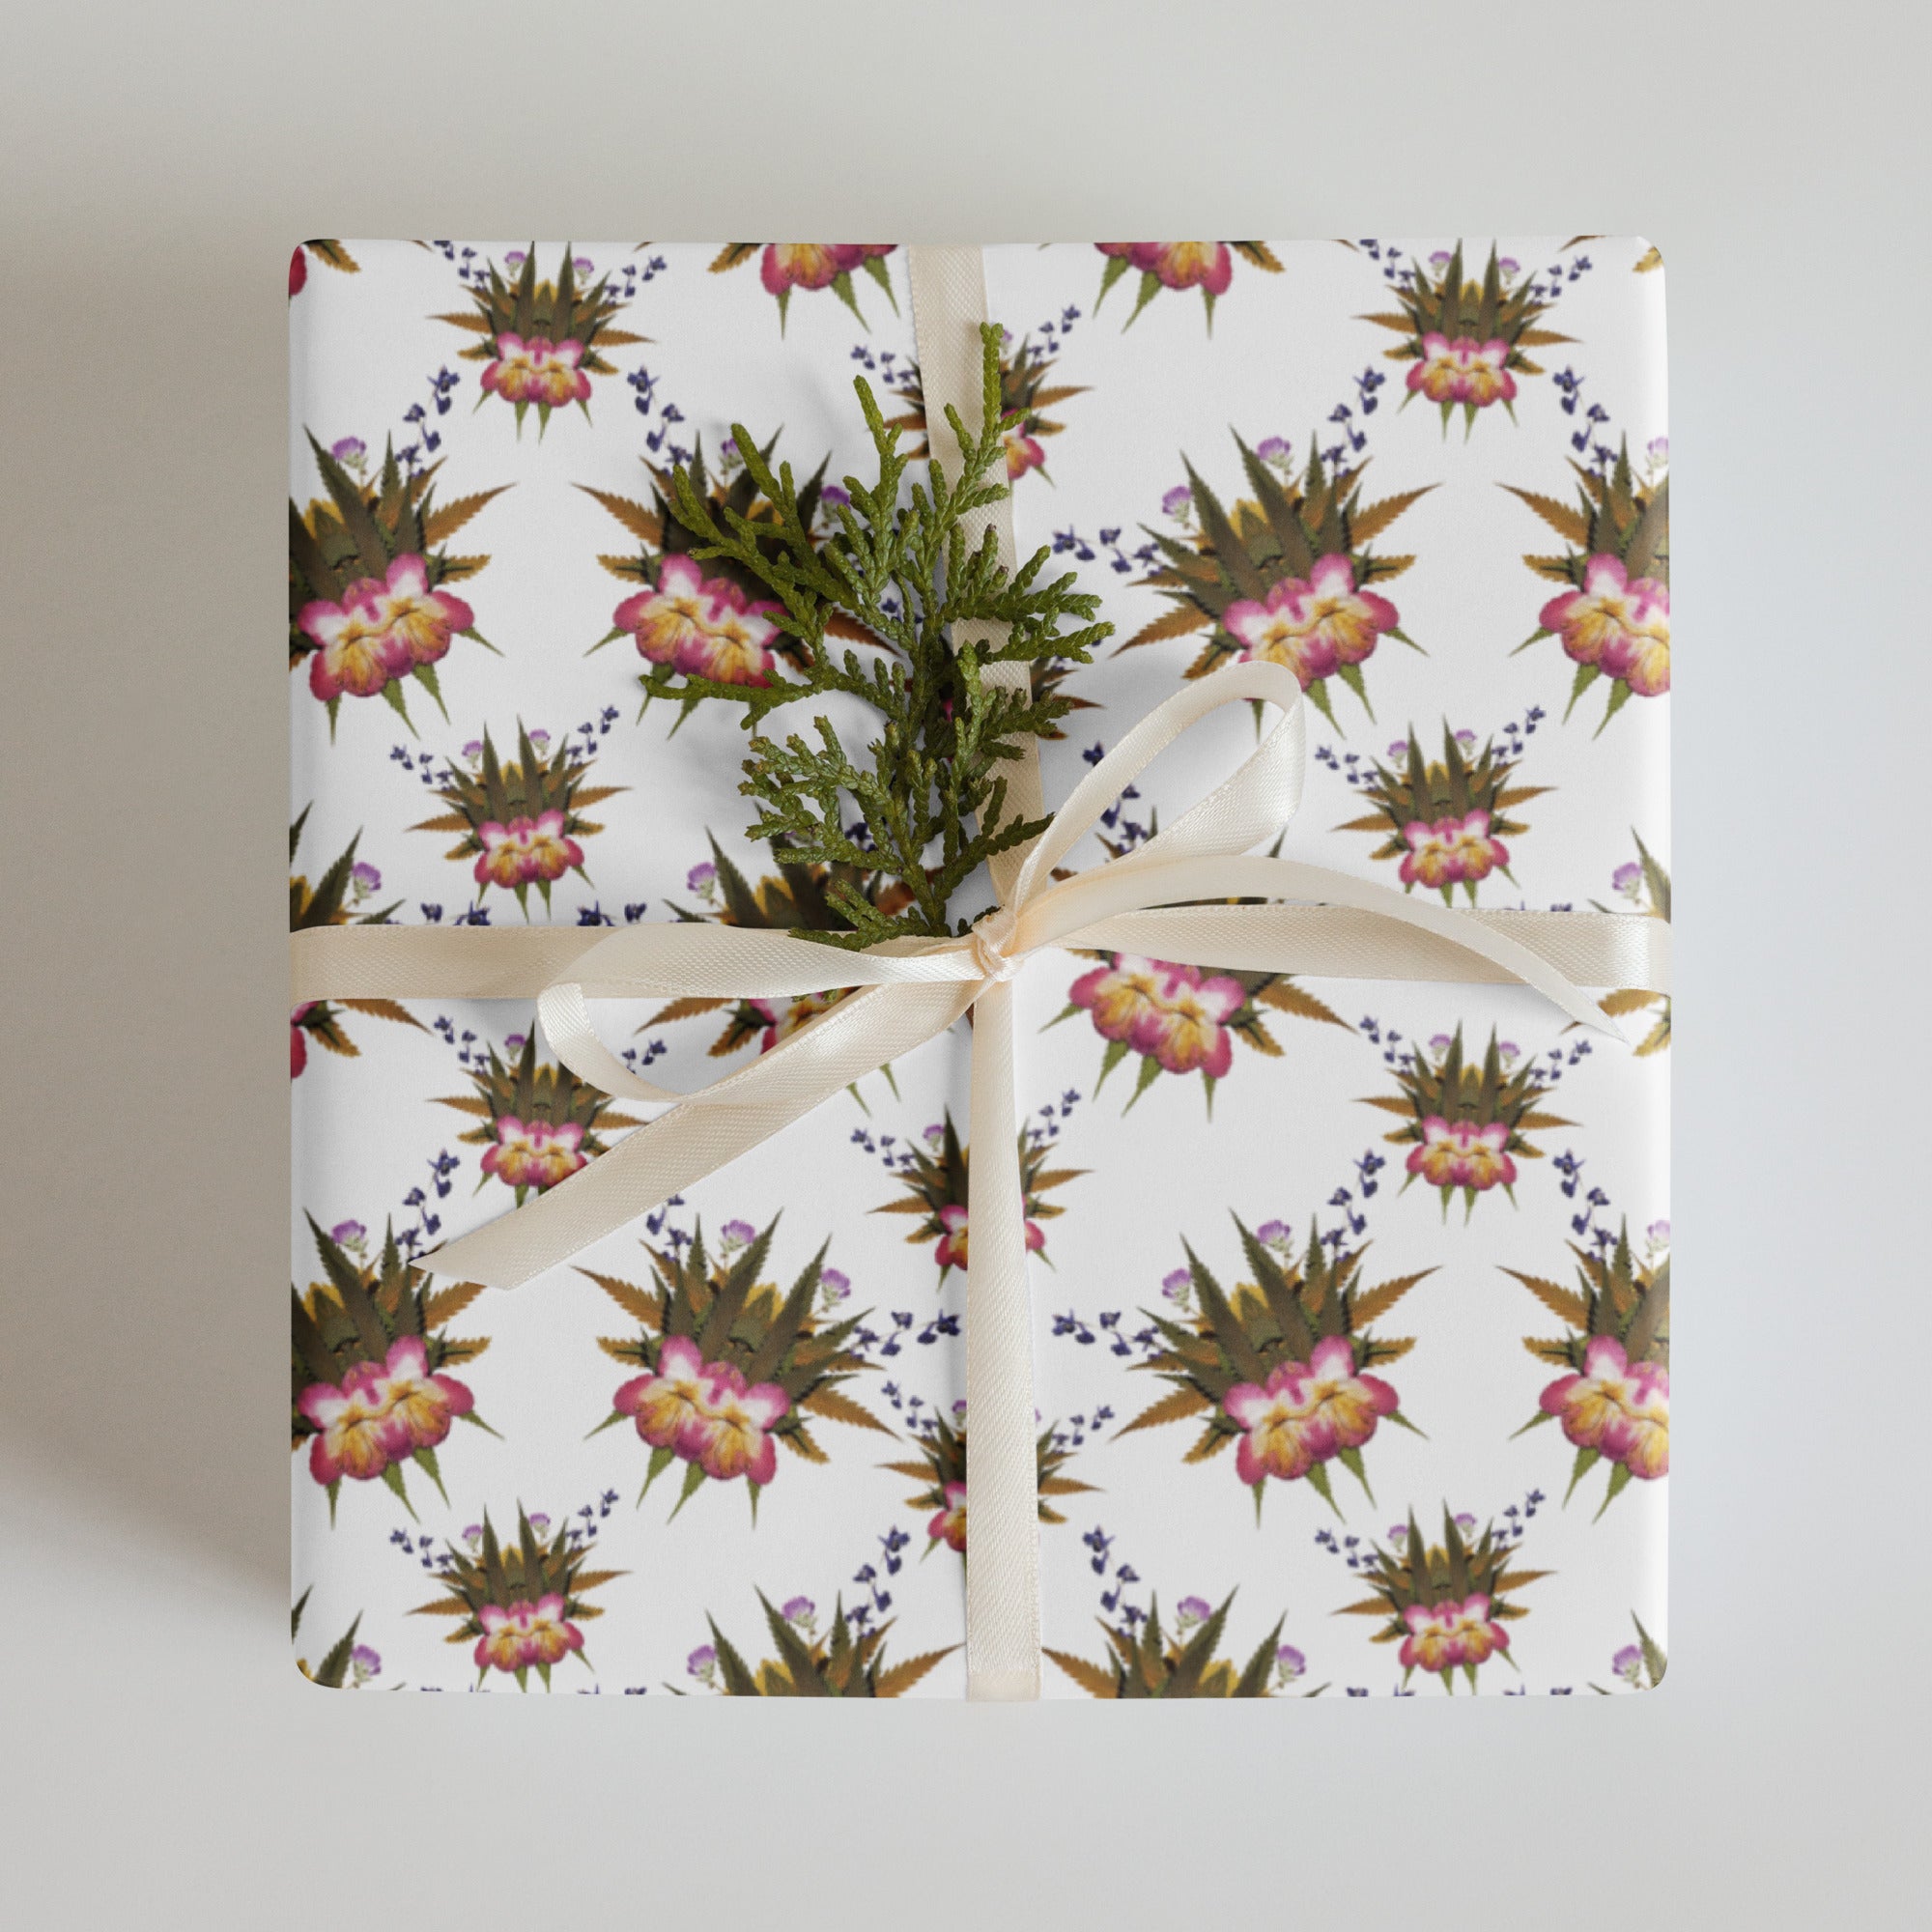 Smoochie Boochie (Whiteout) Wrapping paper sheets